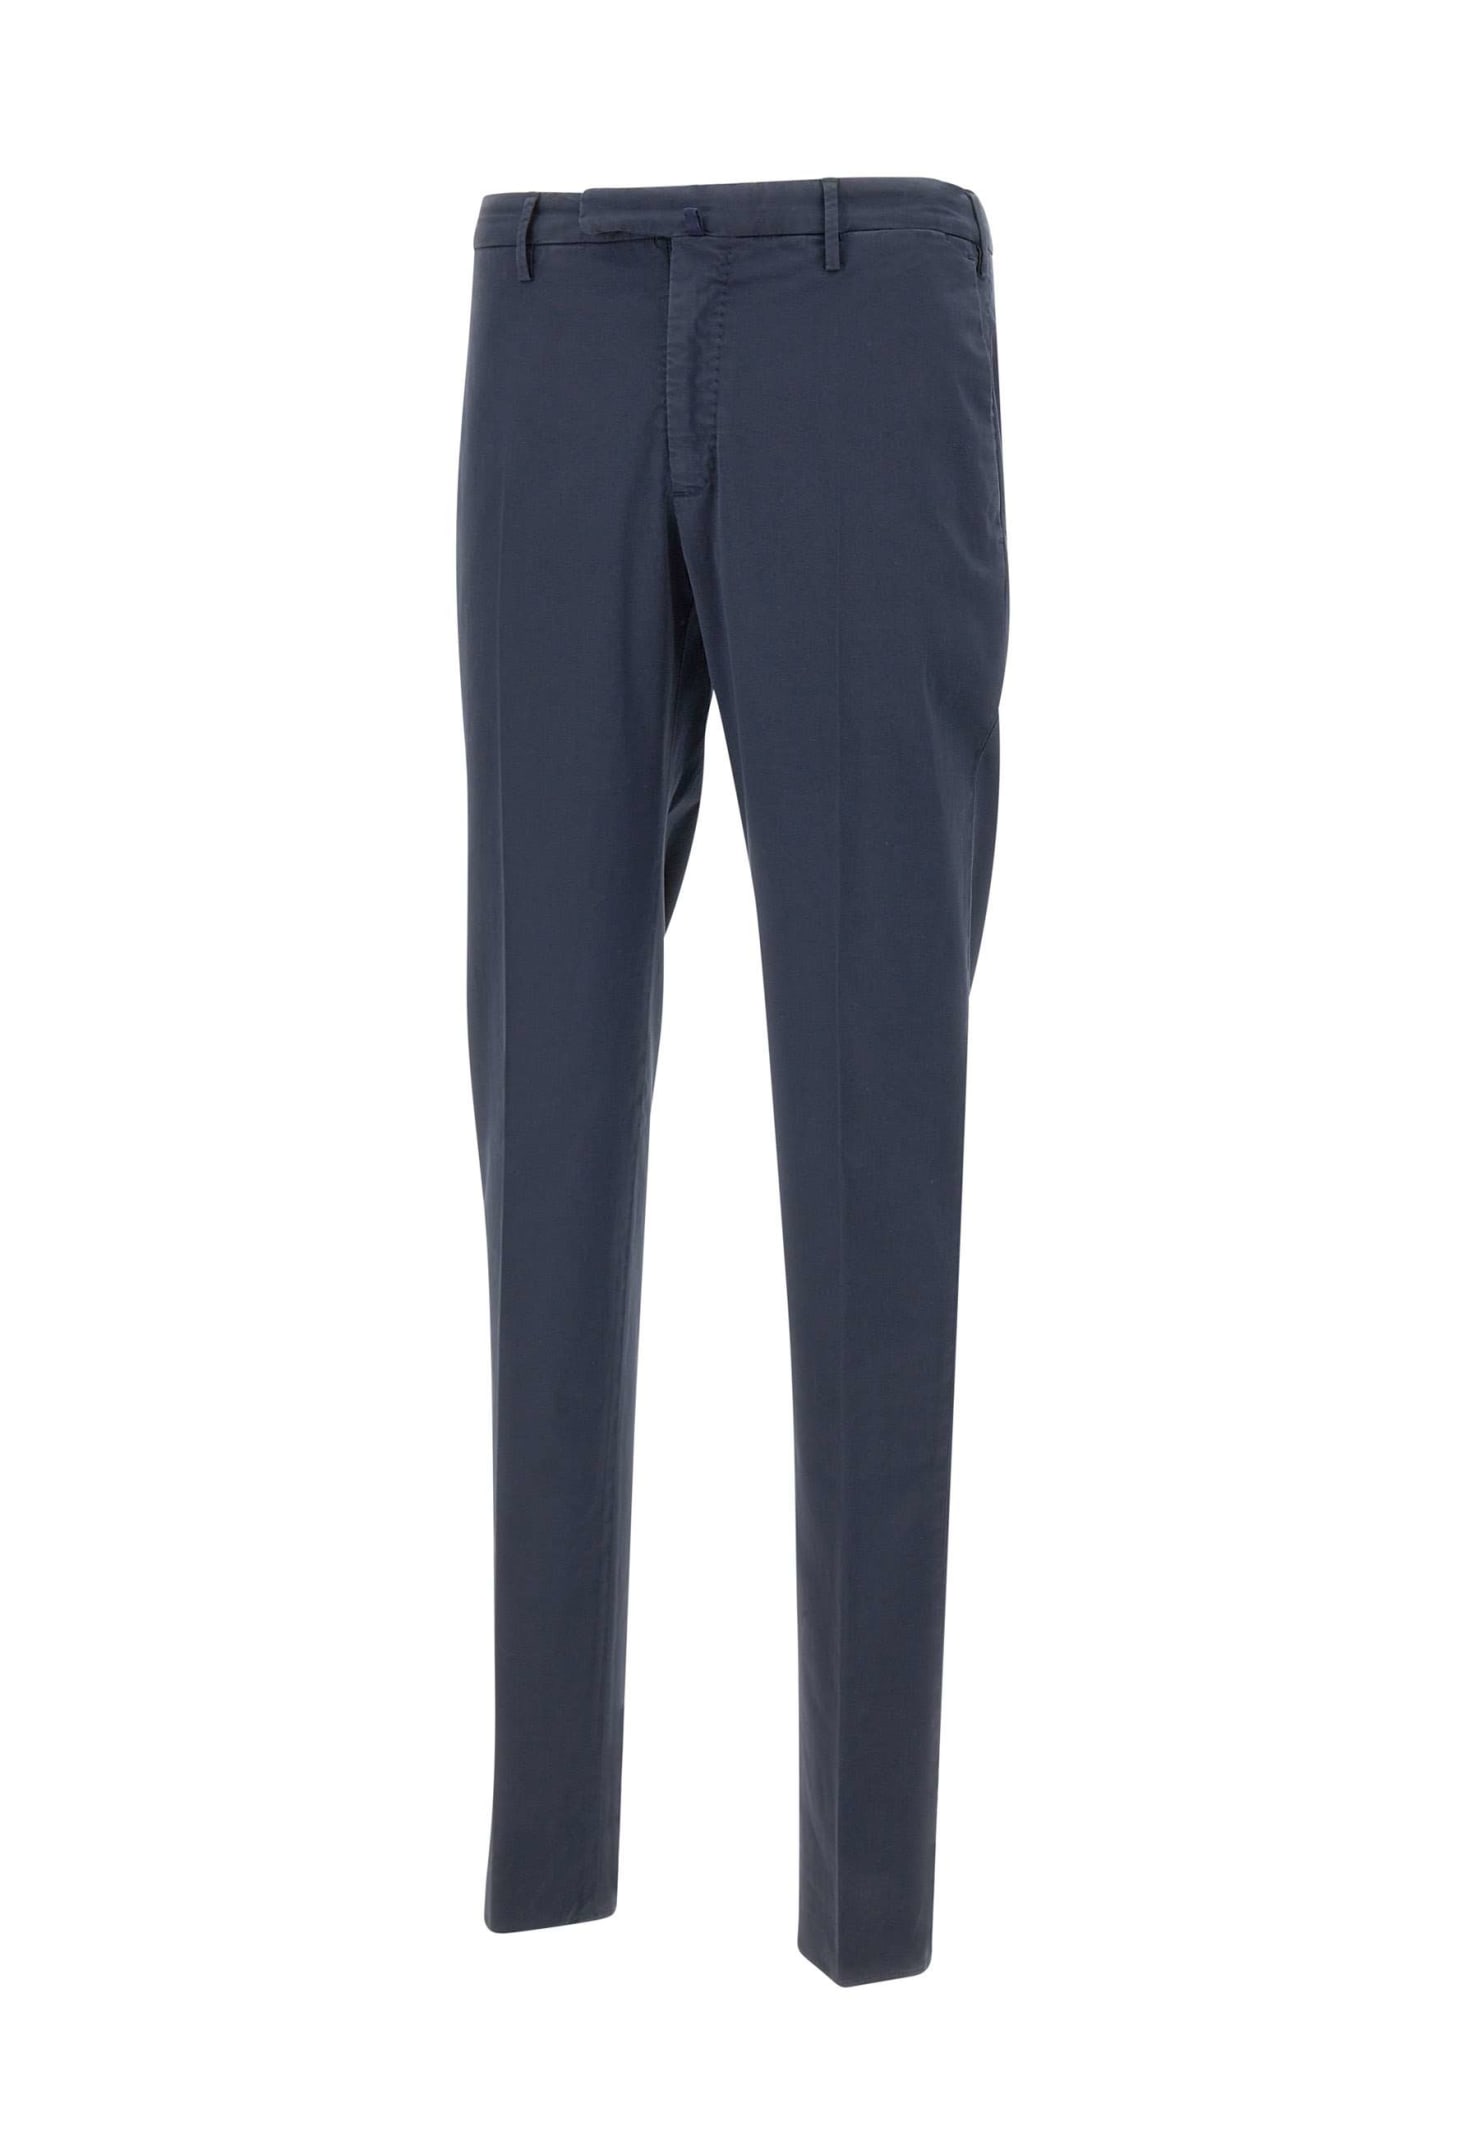 Incotex pressed-crease tailored trousers - Grey